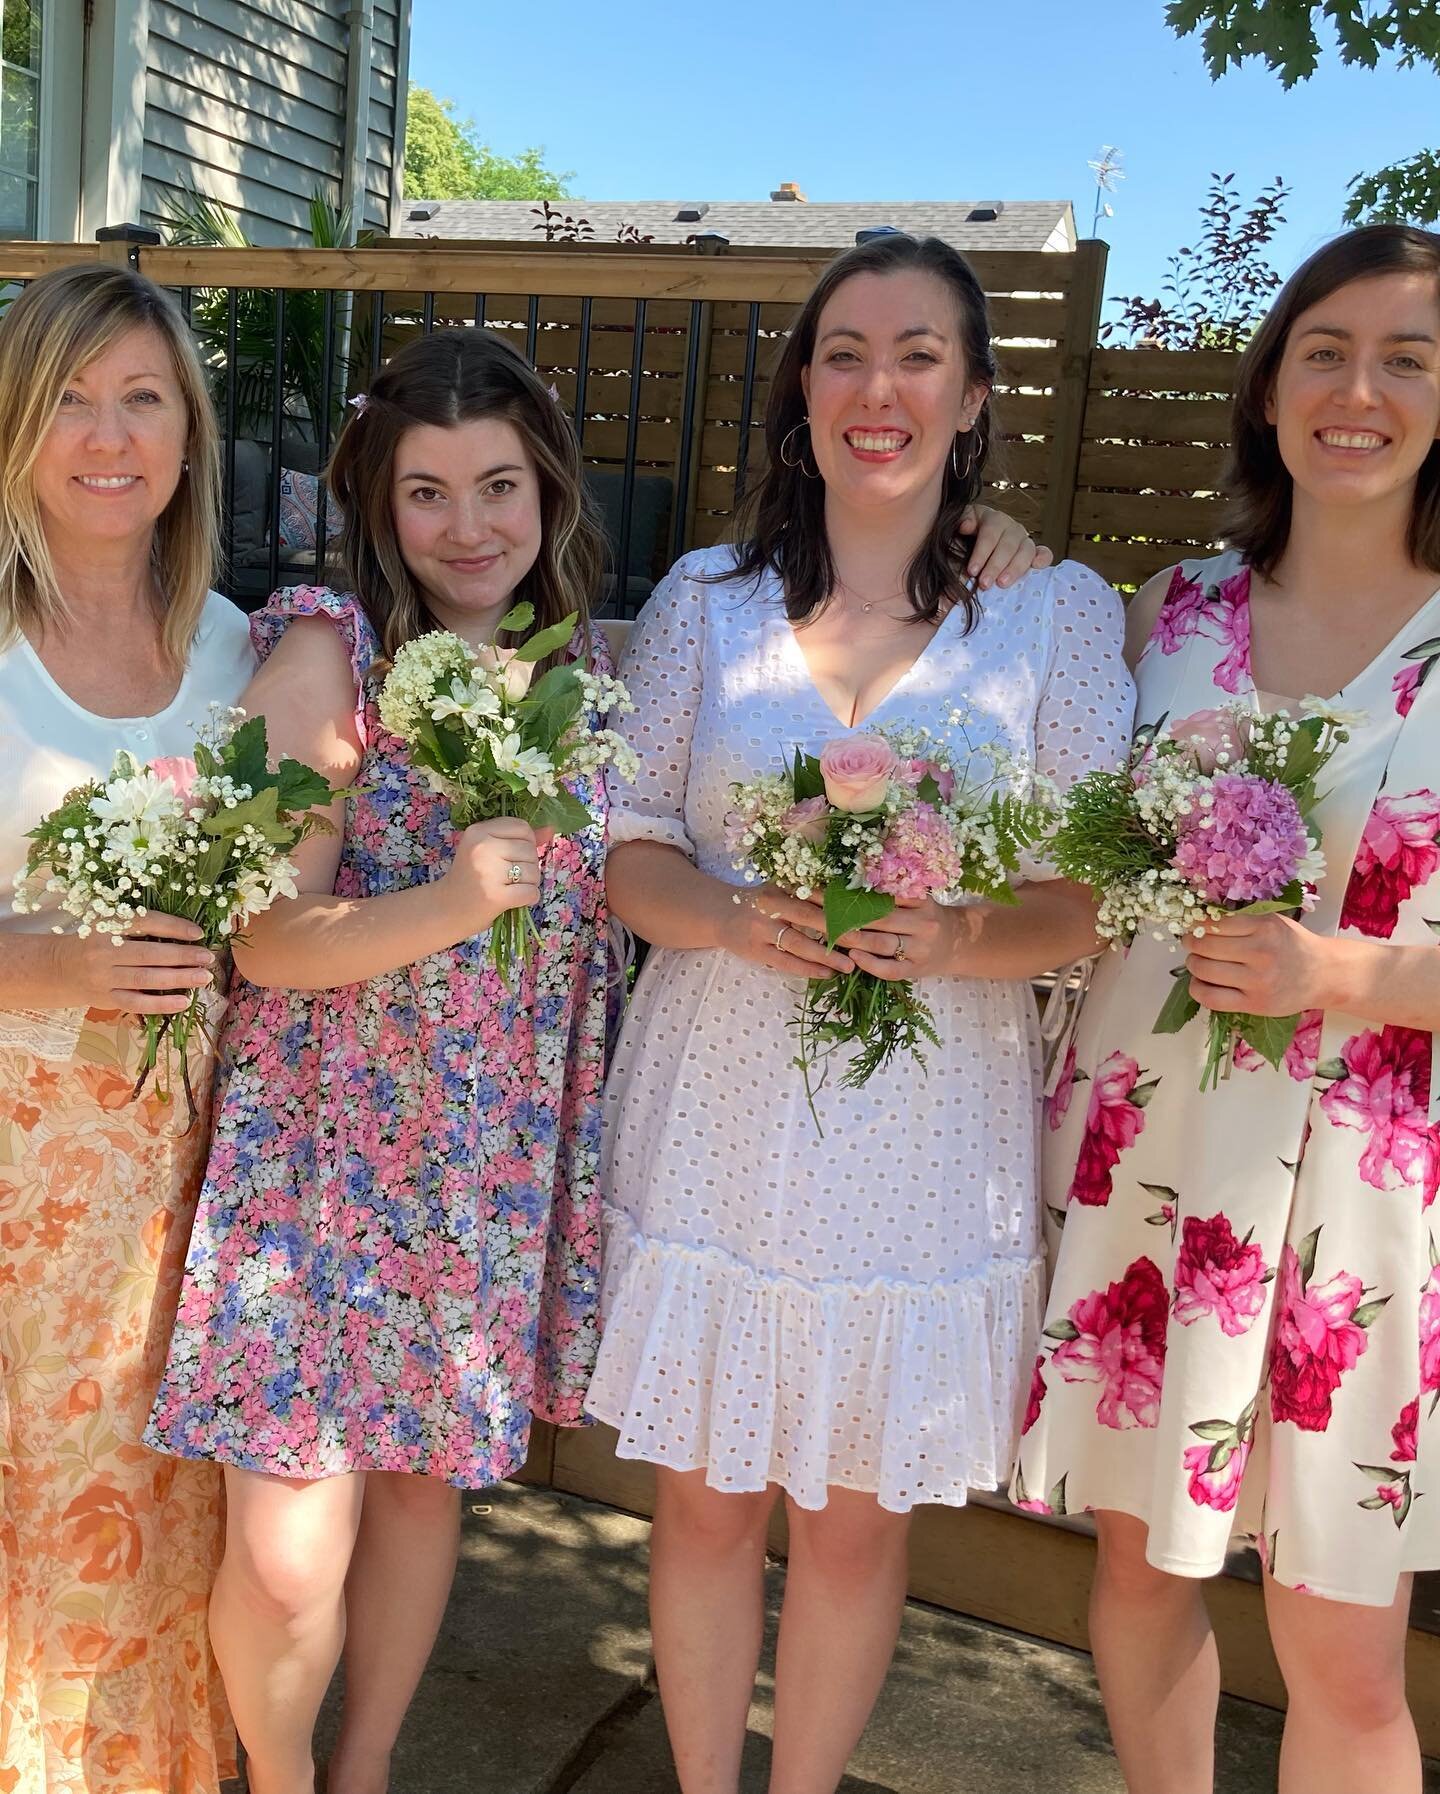 Had such an amazing time at my bridal shower this weekend! Thank you so much to my mom, nan, and all my bridesmaids for putting it together and for everyone who came out, really felt the love ❤️ 
.
.
.
.
.
.
.
.
.
.
.
.
@juliec1057 @joangiffen @straw